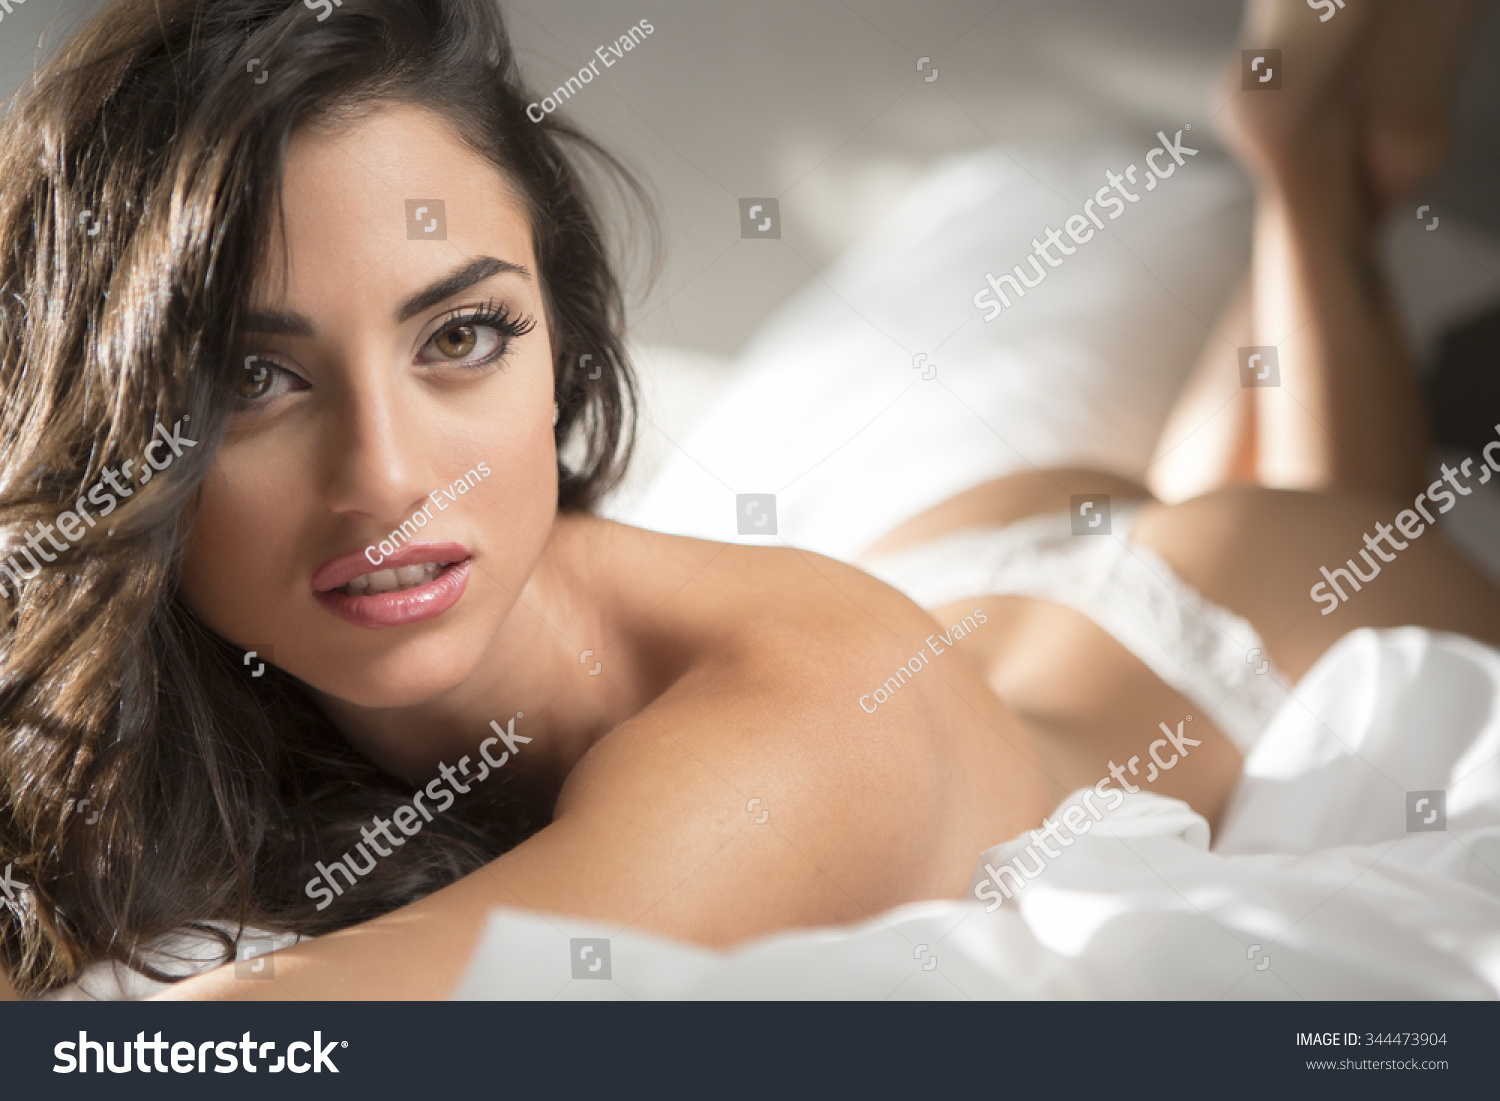 Laying in bed erotic